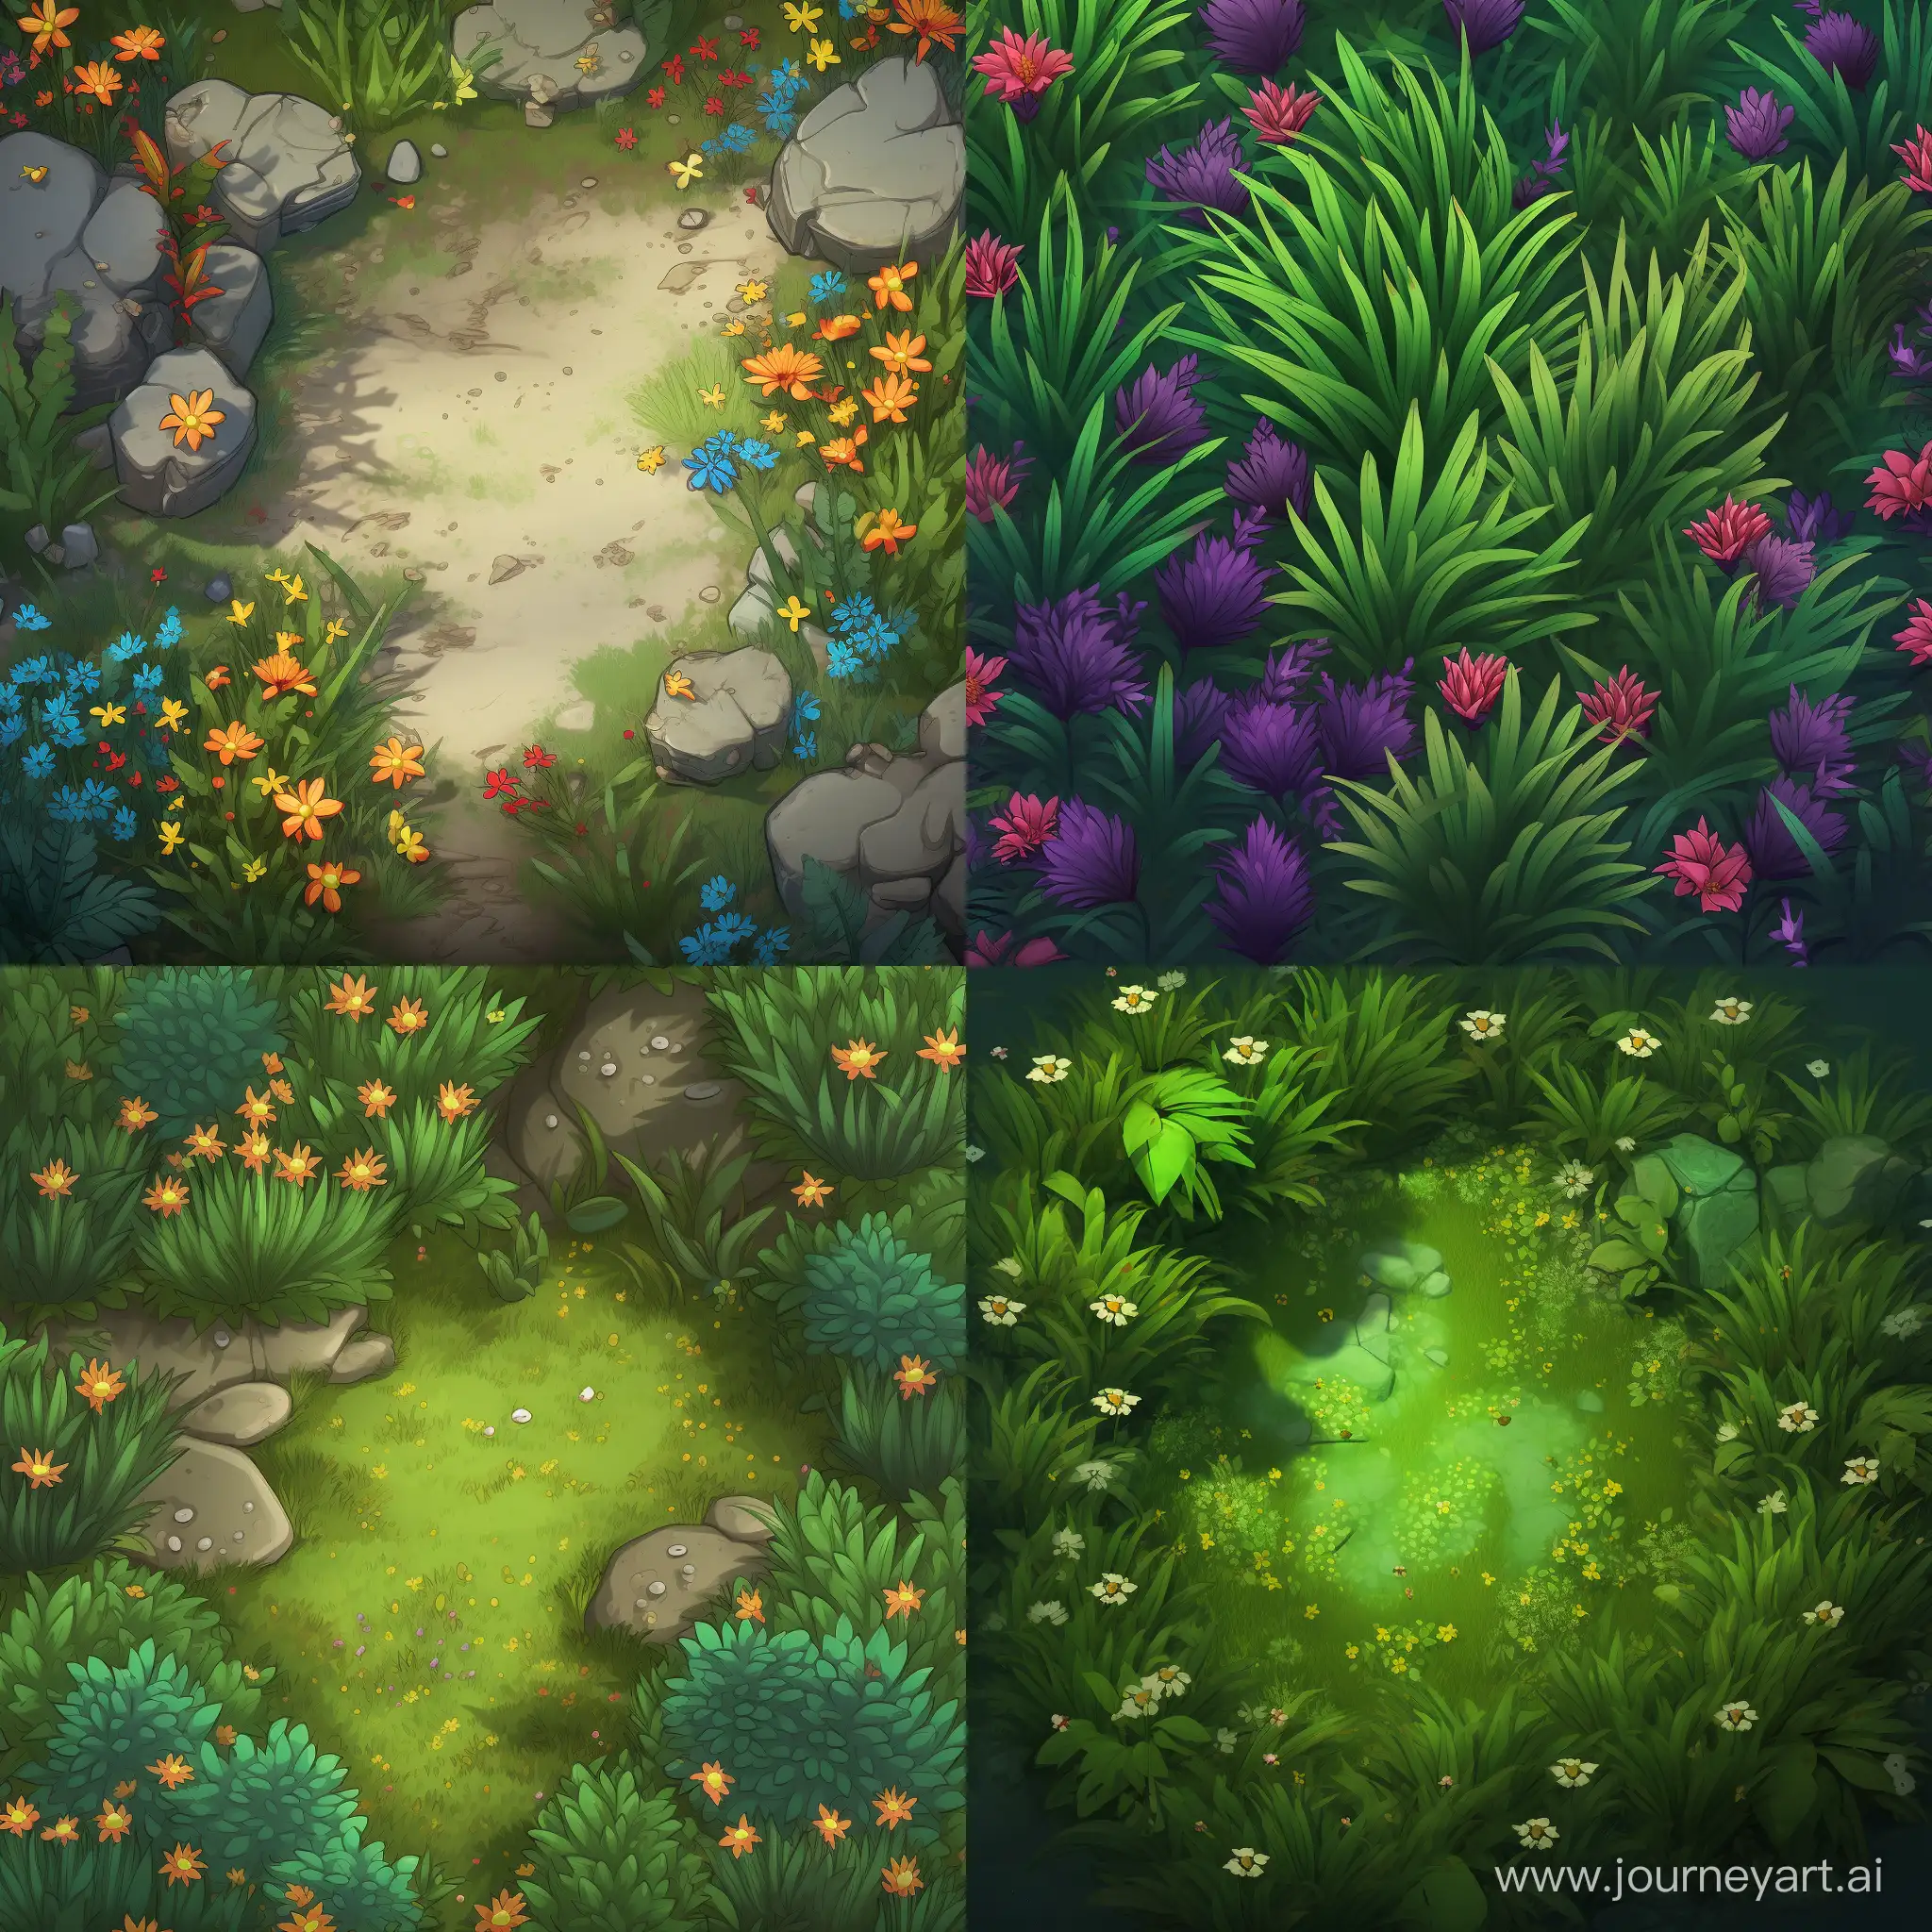 Vibrant-Cartoon-Topdown-Game-Art-Lush-Grass-and-Flower-Background-1080x1080